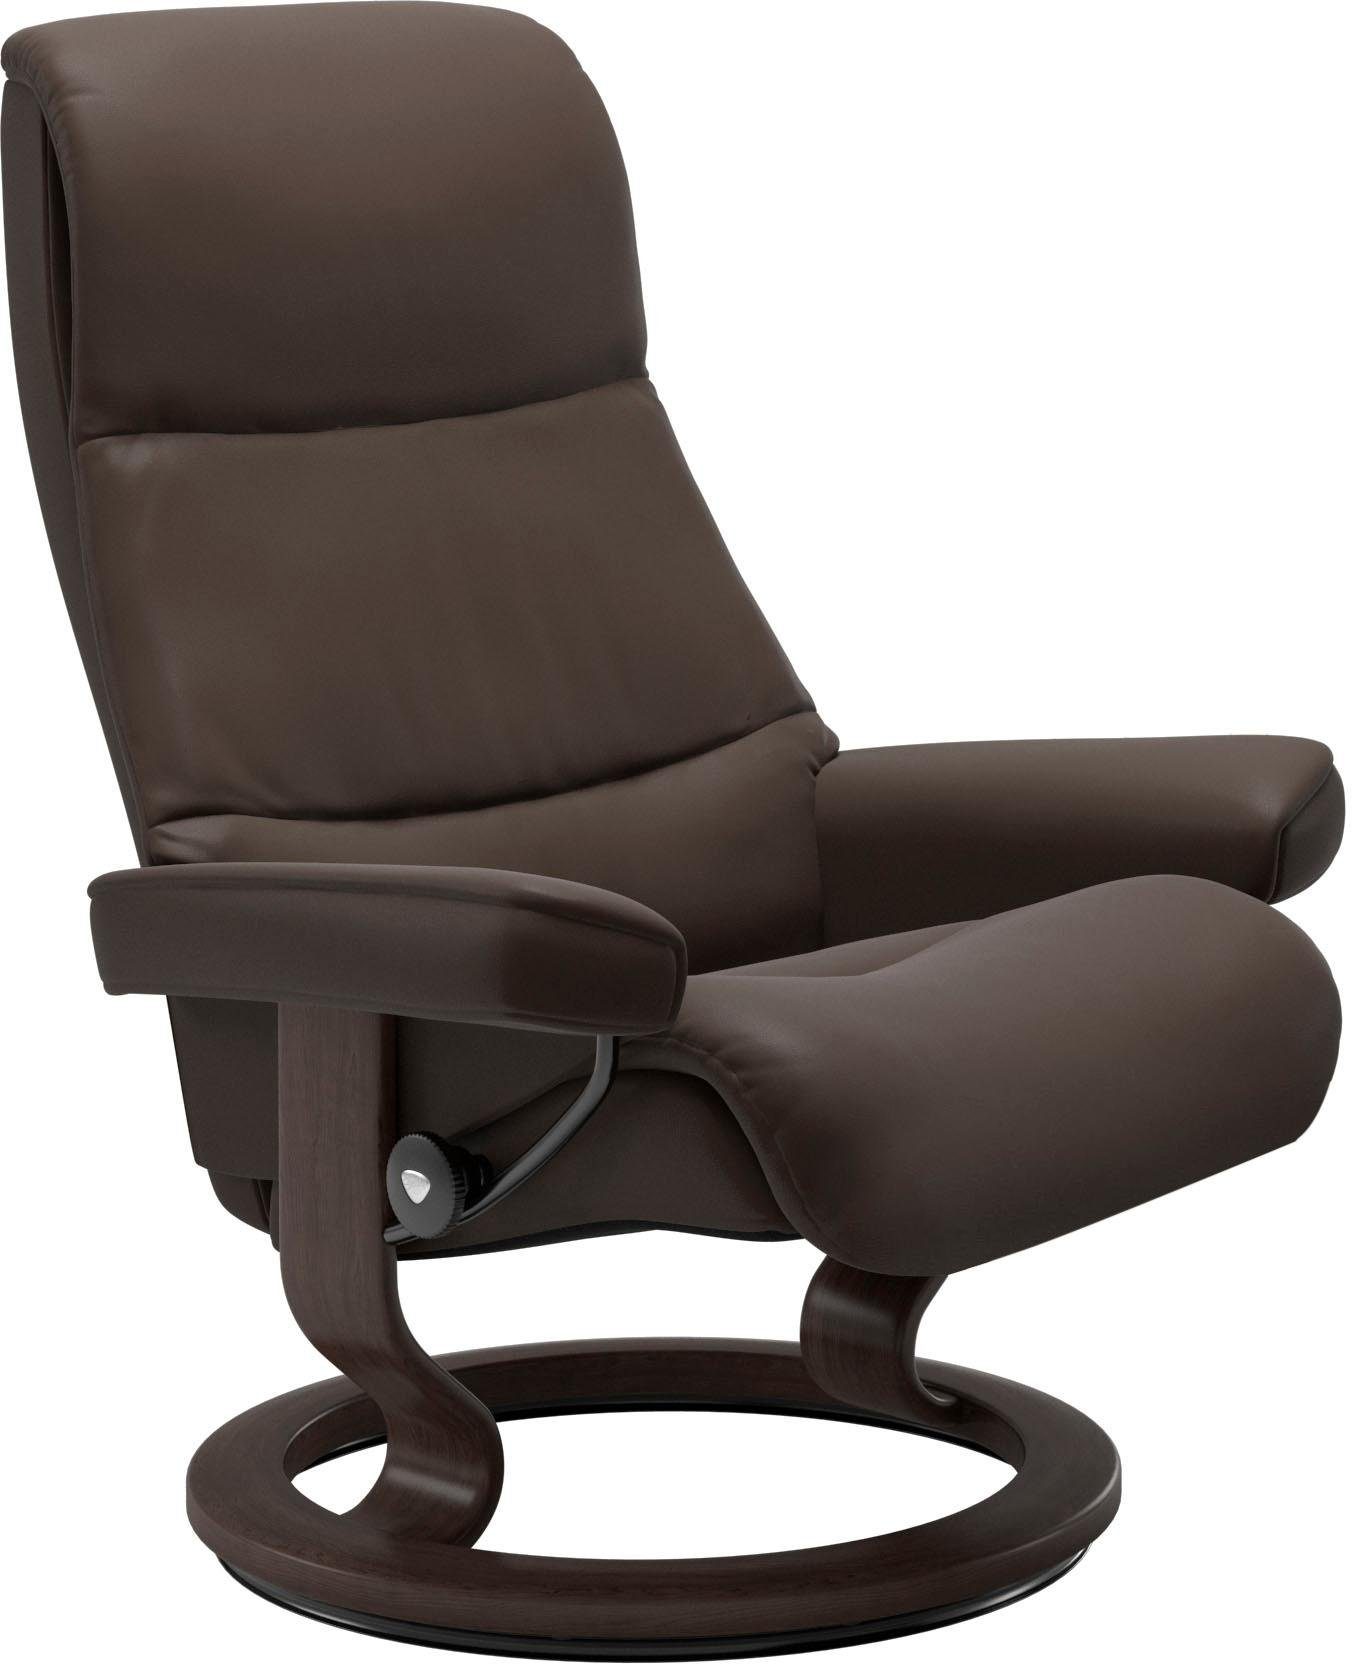 Classic Wenge L,Gestell mit Größe Stressless® Base, Relaxsessel View,